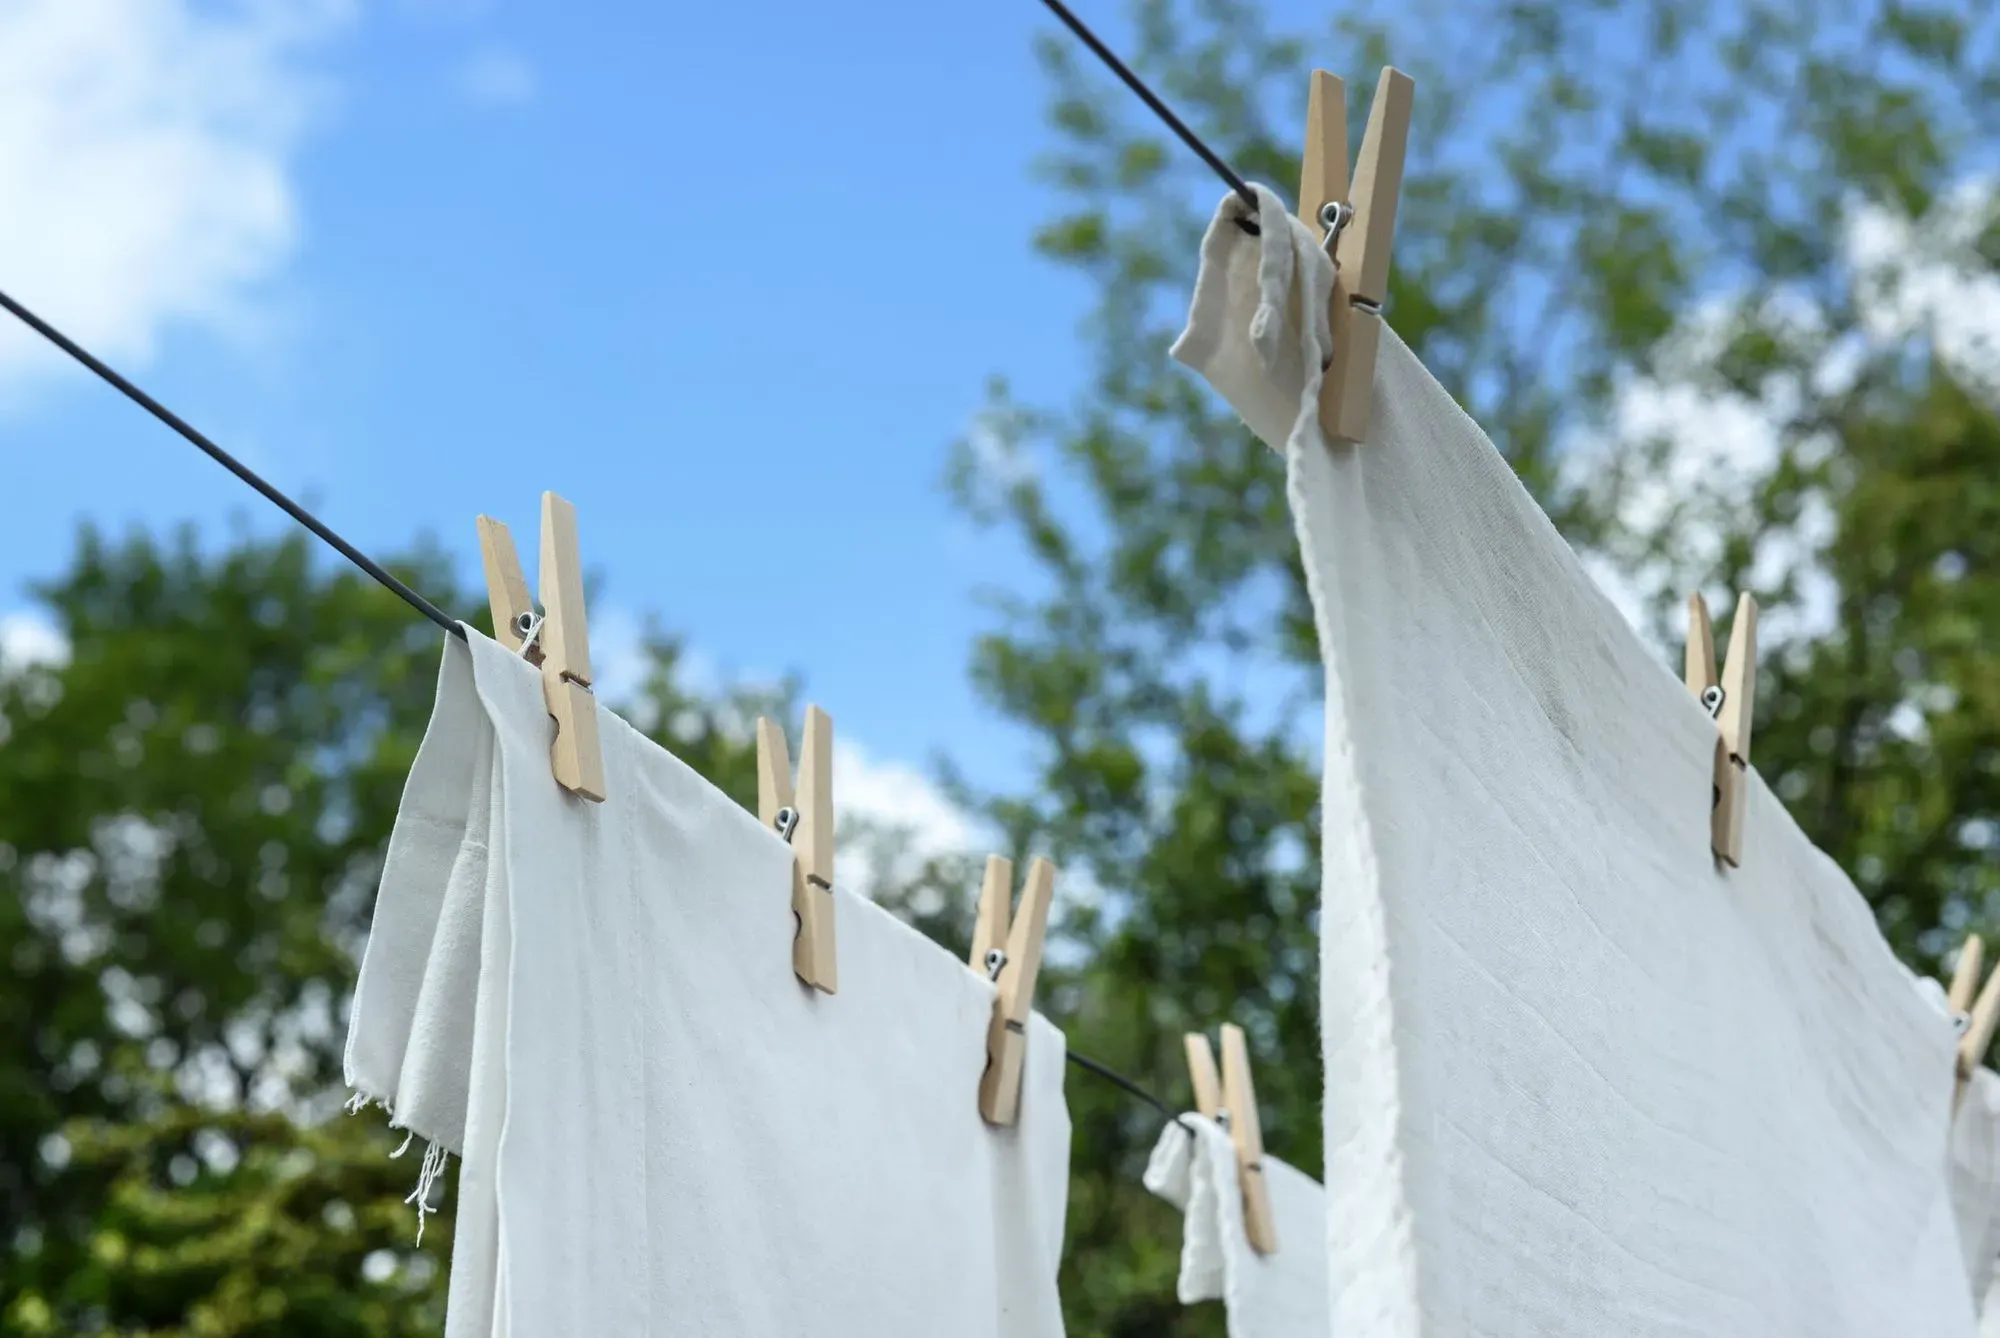 Here are some interesting quotes about laundry.